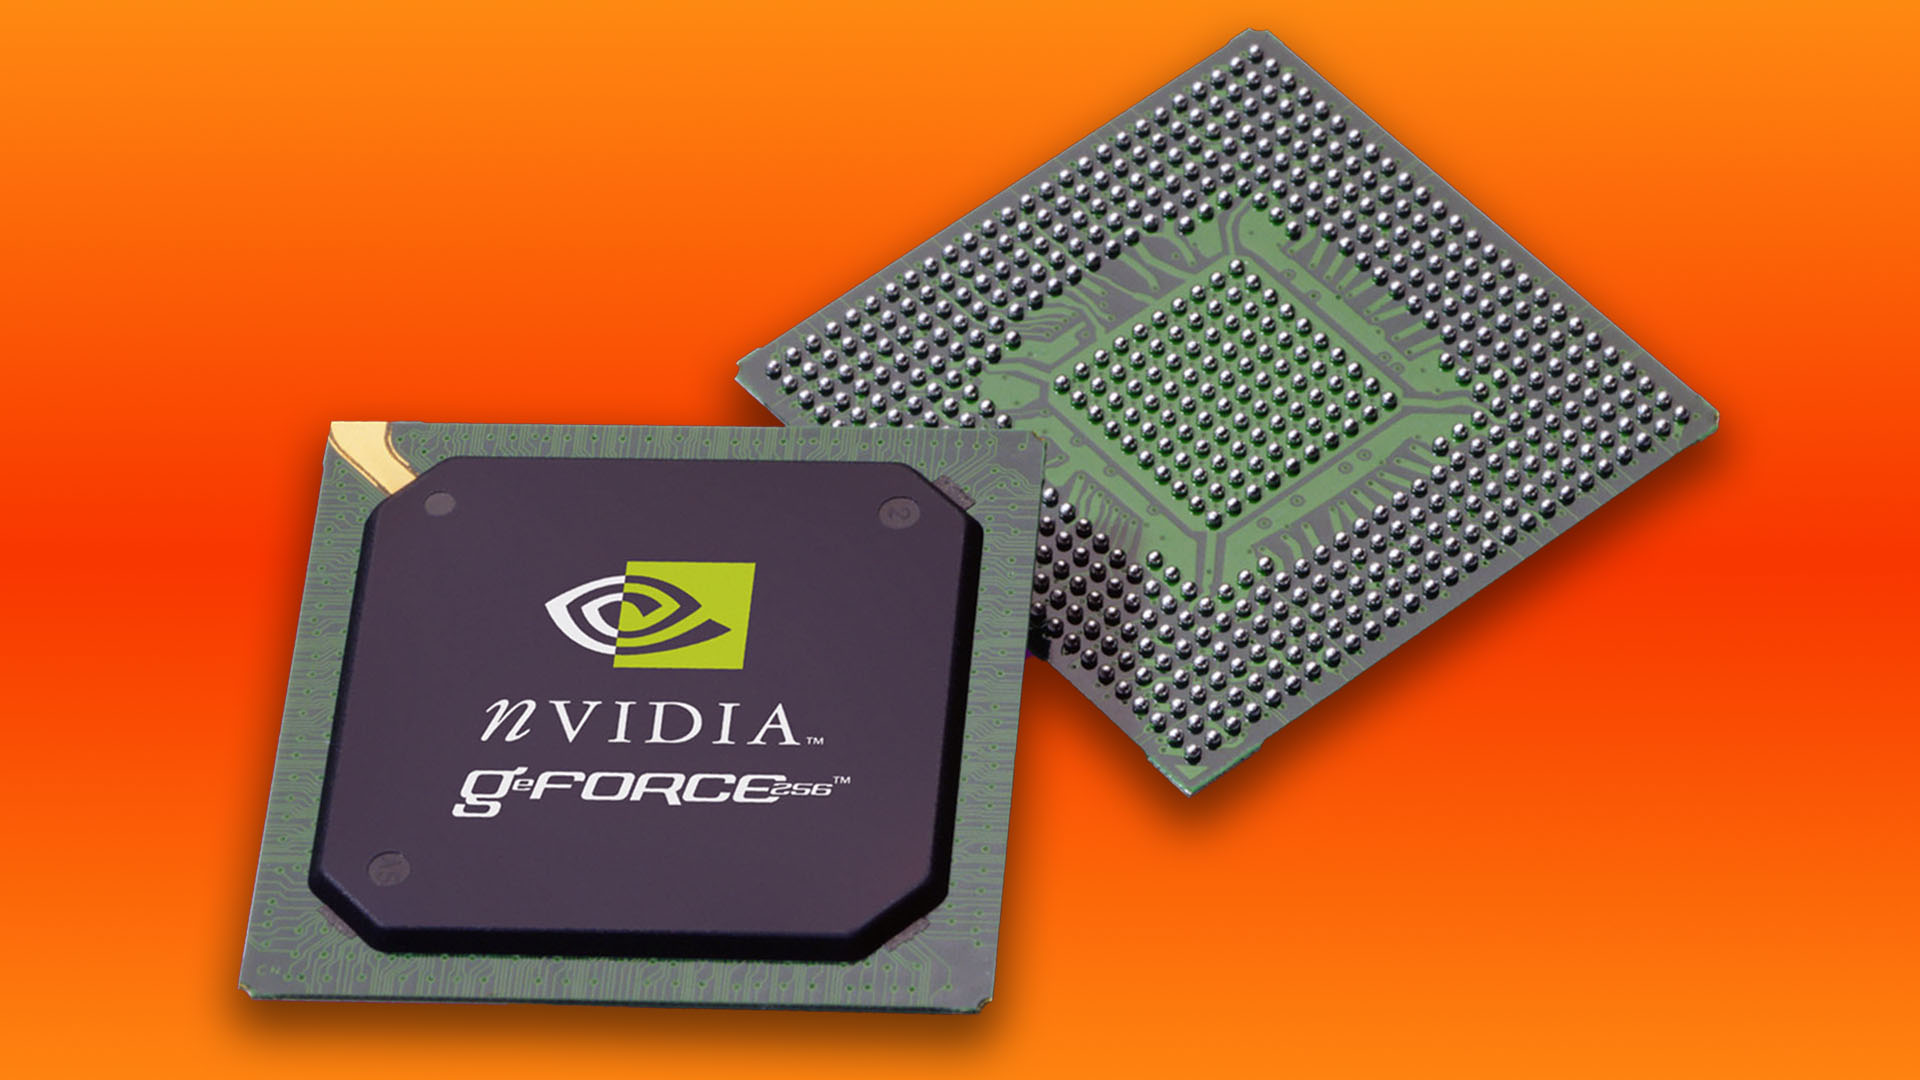 Remembering the Nvidia GeForce 256 – the first PC gaming GPU